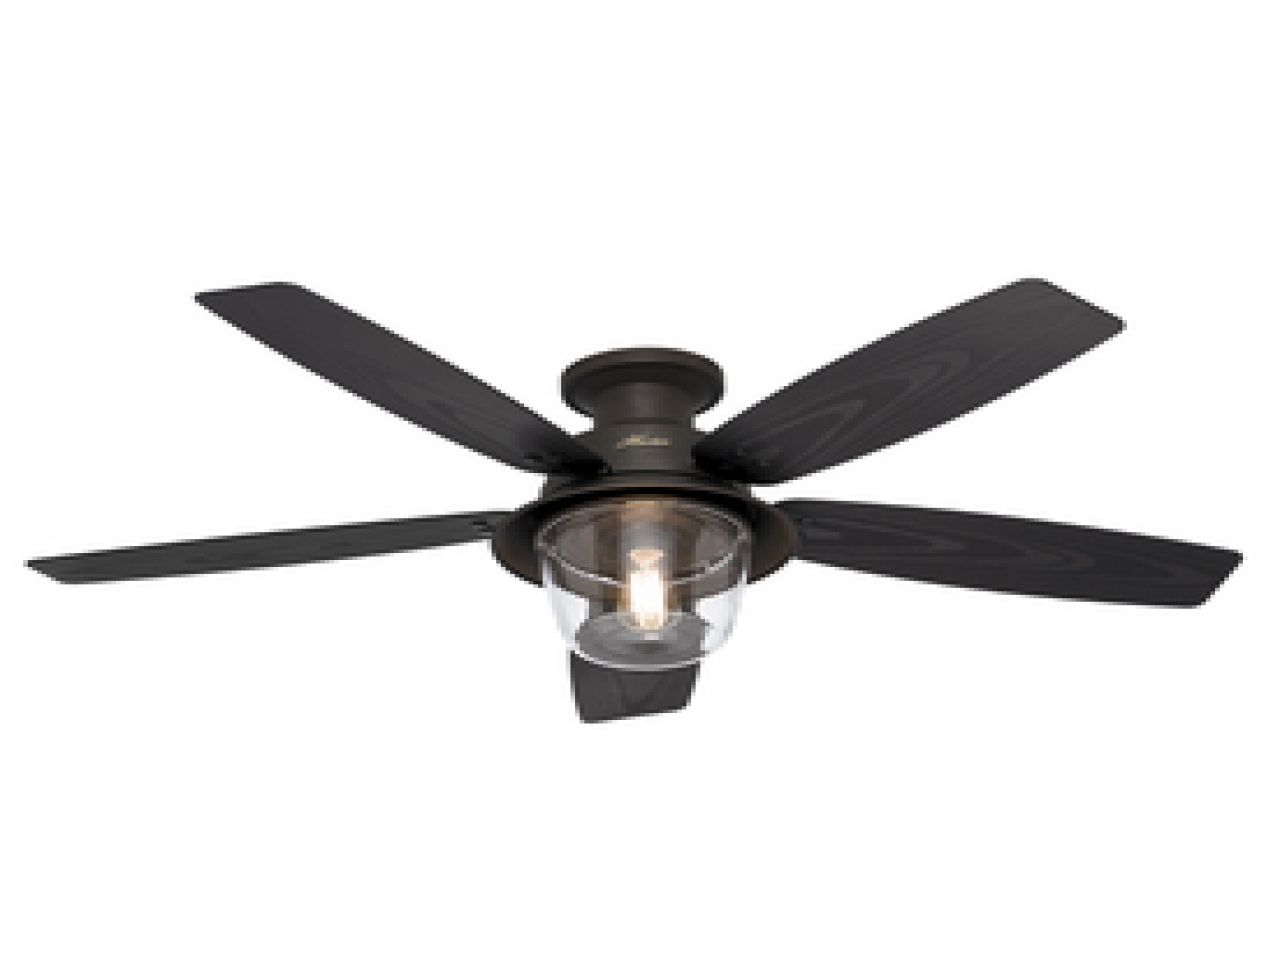 Outdoor Ceiling Fans With Lights Damp Rated • Ceiling Lights Within Outdoor Ceiling Fans With Wet Rated Lights (View 2 of 15)